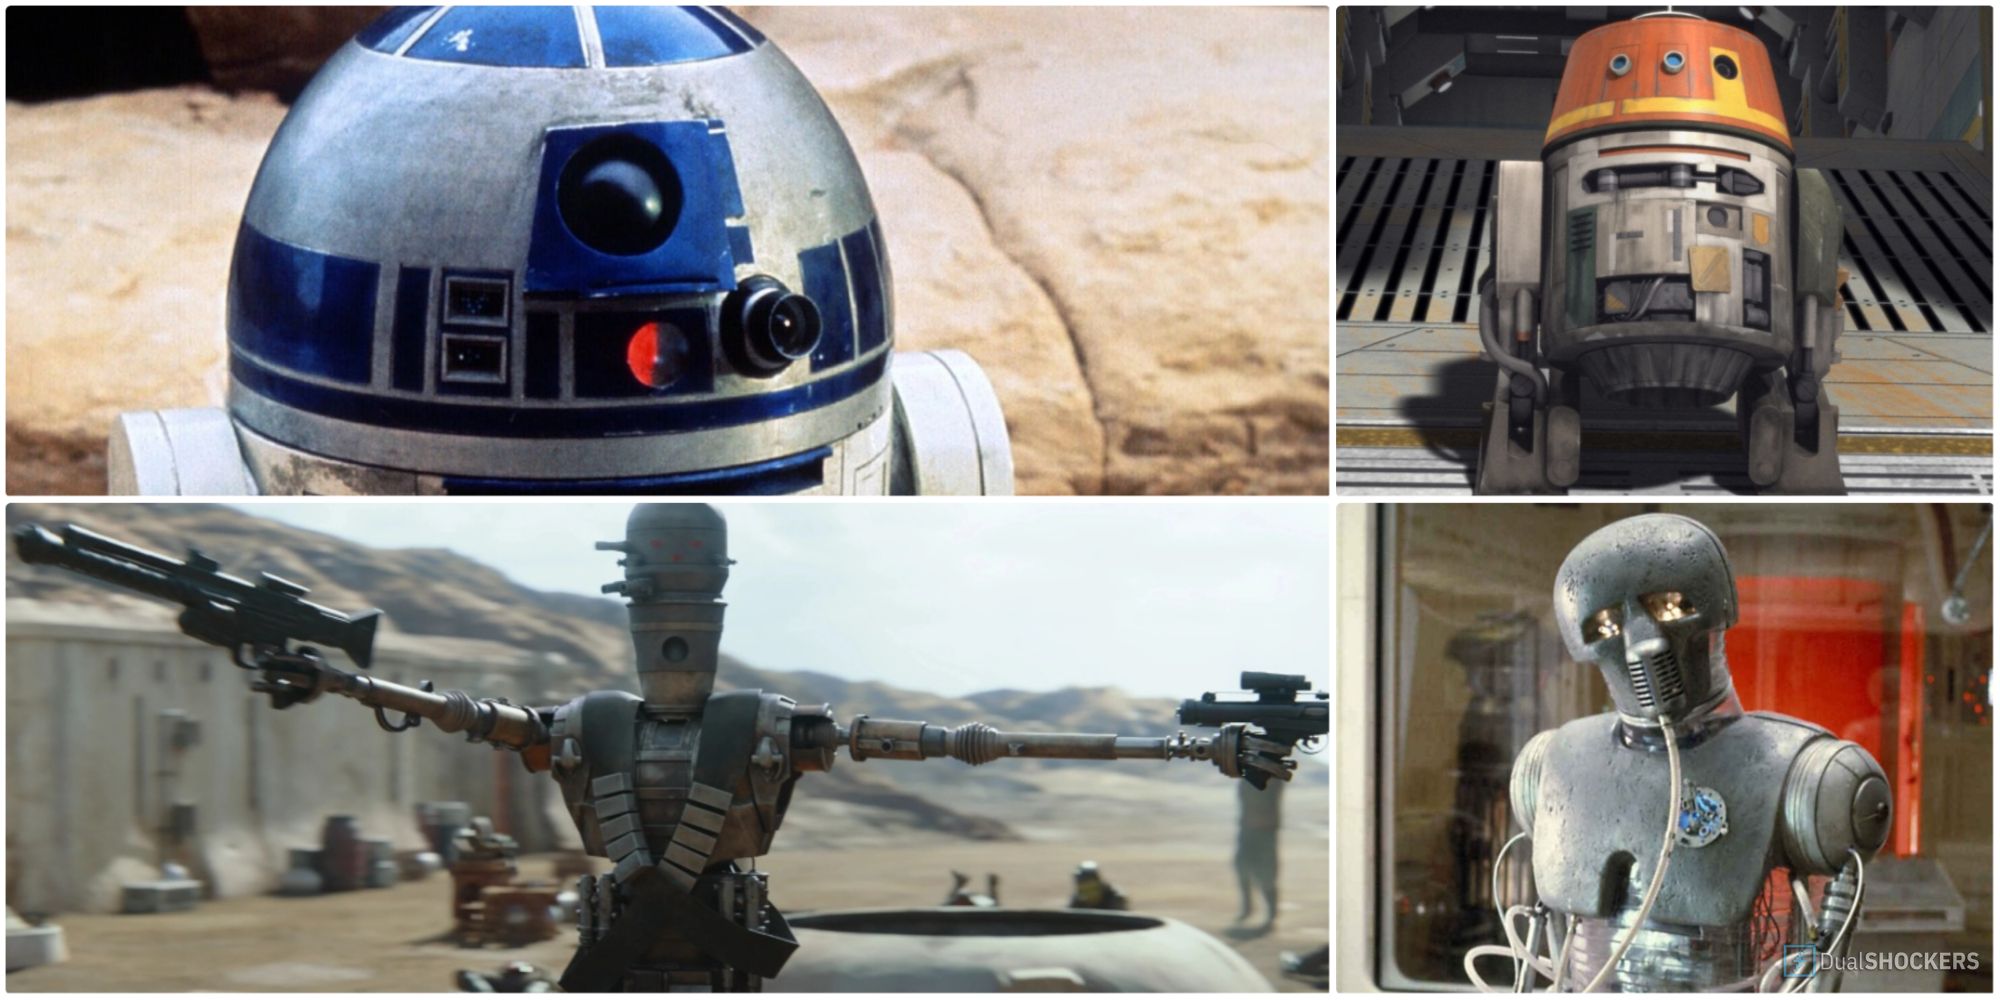 The best droids of the Star Wars universe, ranked